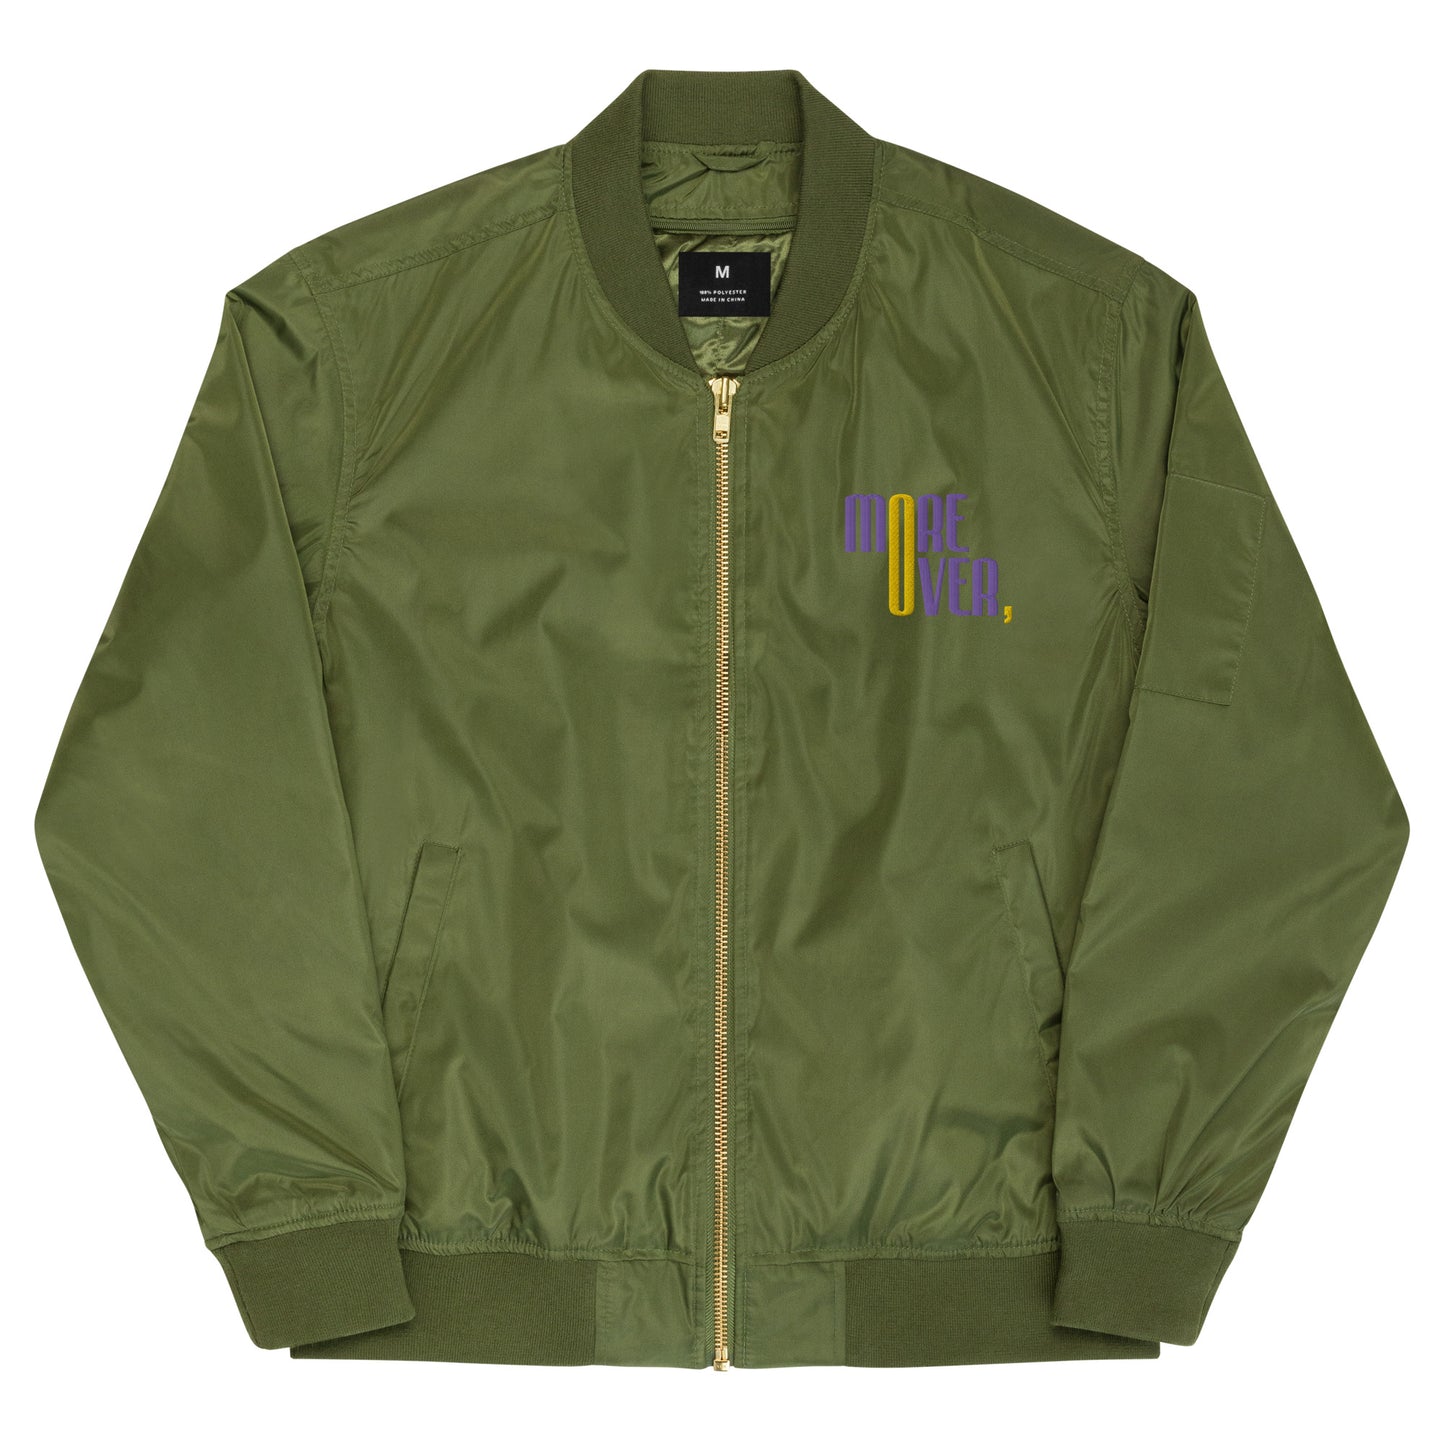 Swords and palm recycled bomber jacket